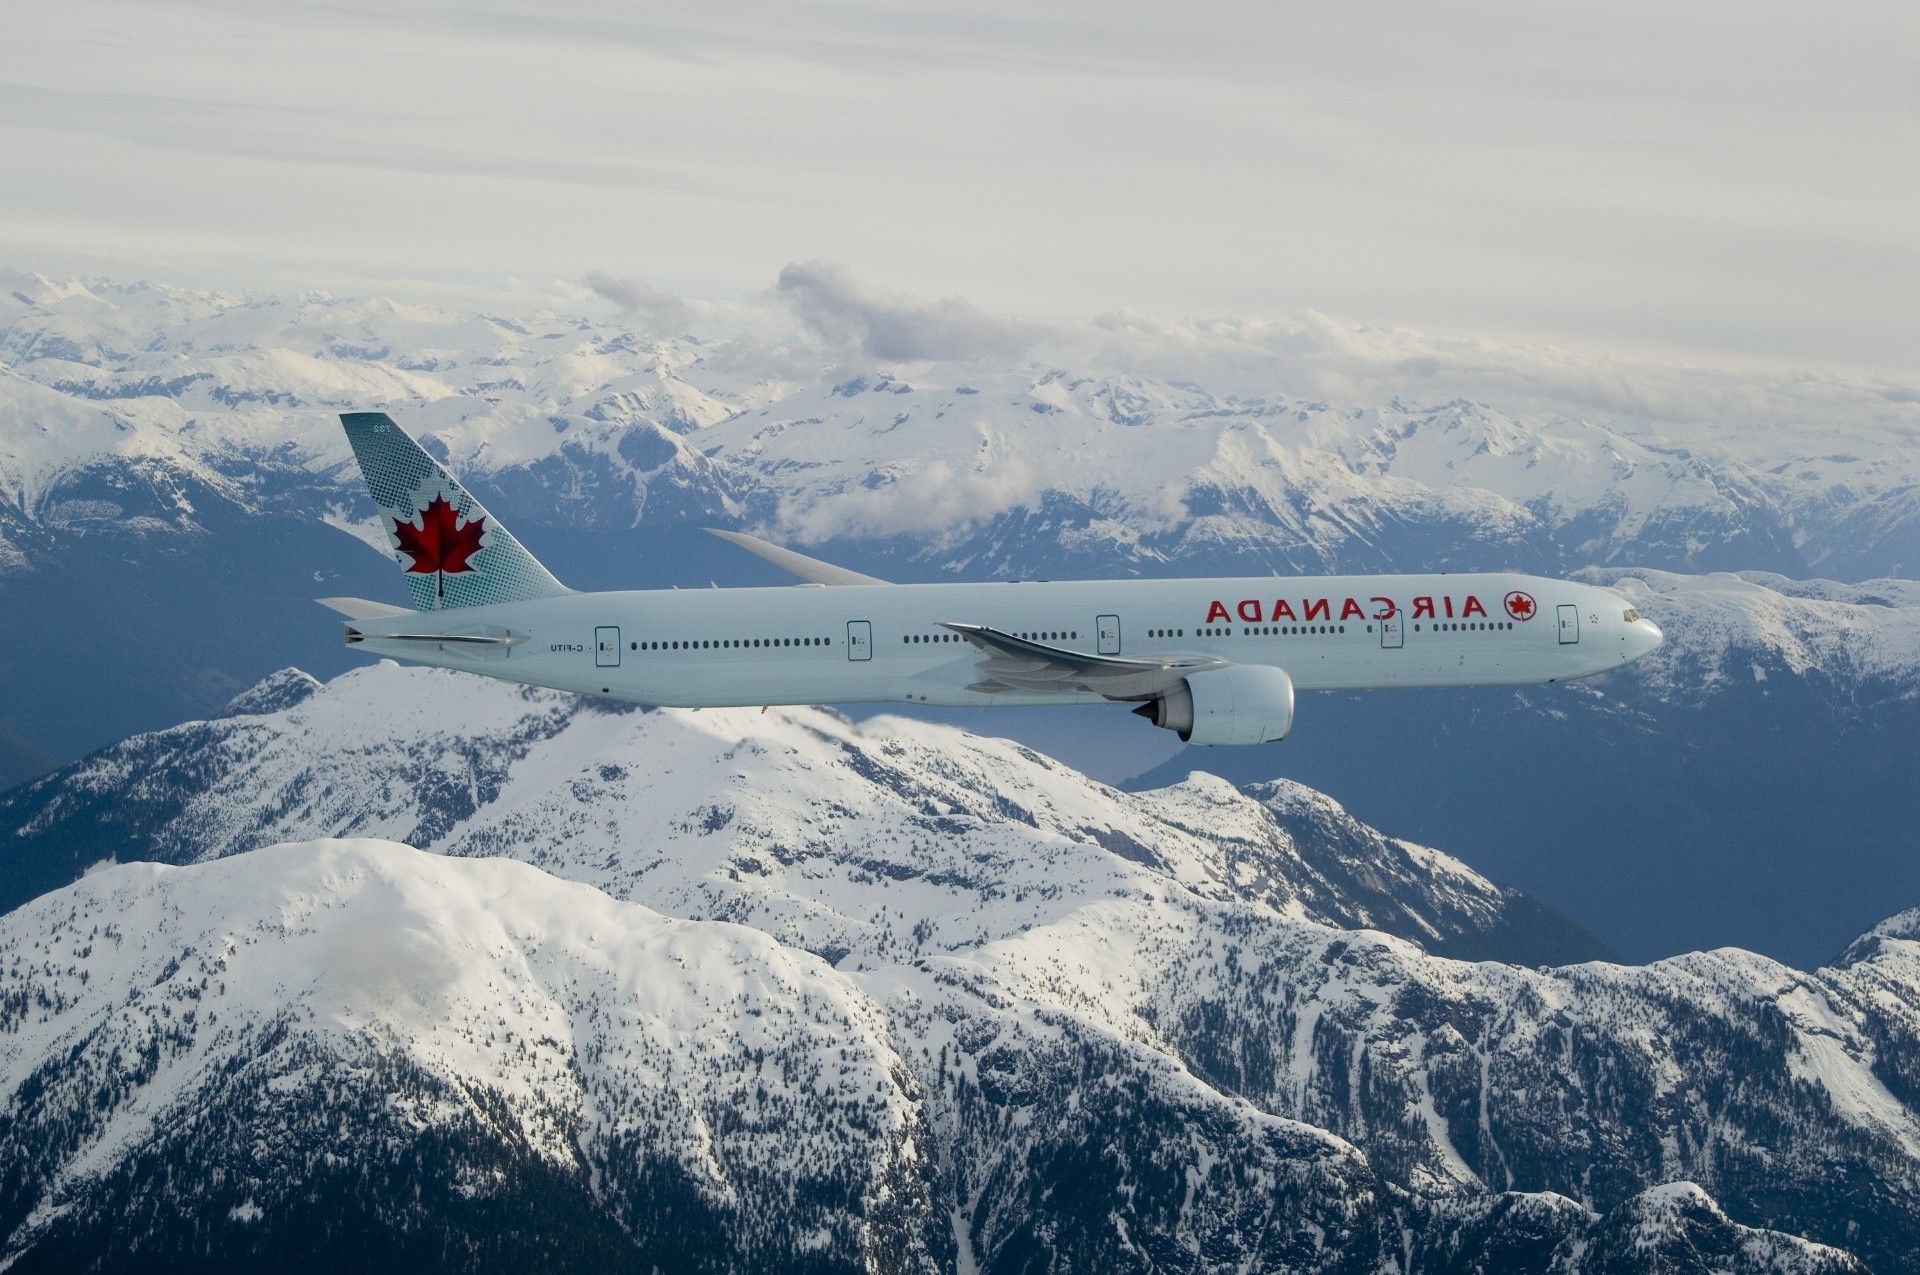 The Air Canada flight over the snowy mountains